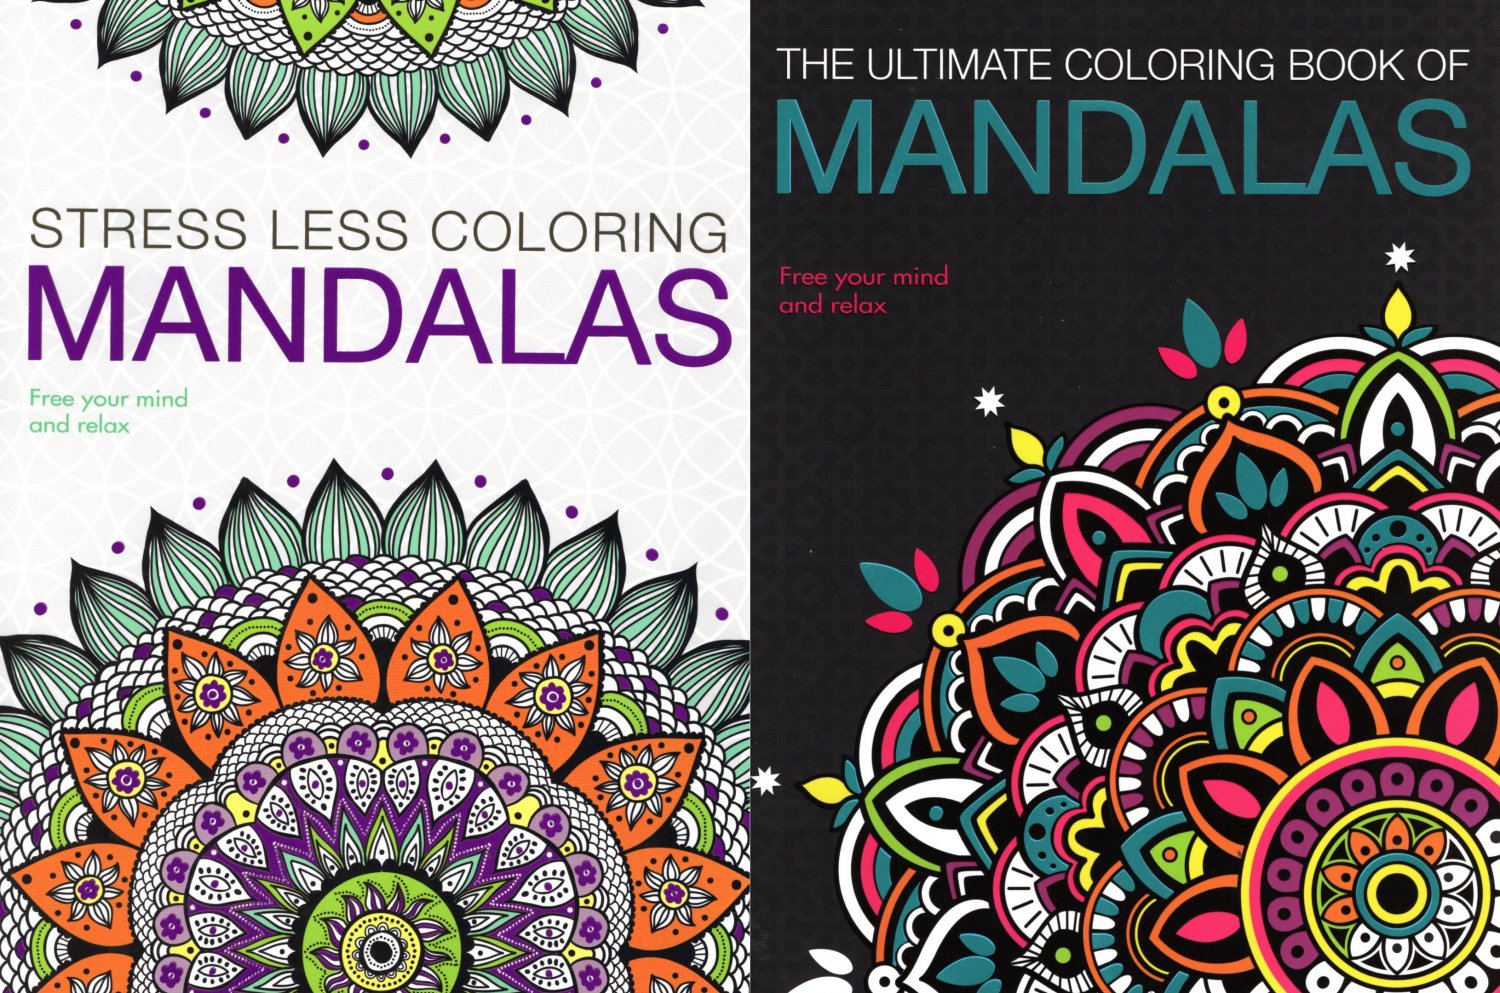 The Ultimate and Stress Less - Coloring Books of Mandalas (Set of 2 Books)